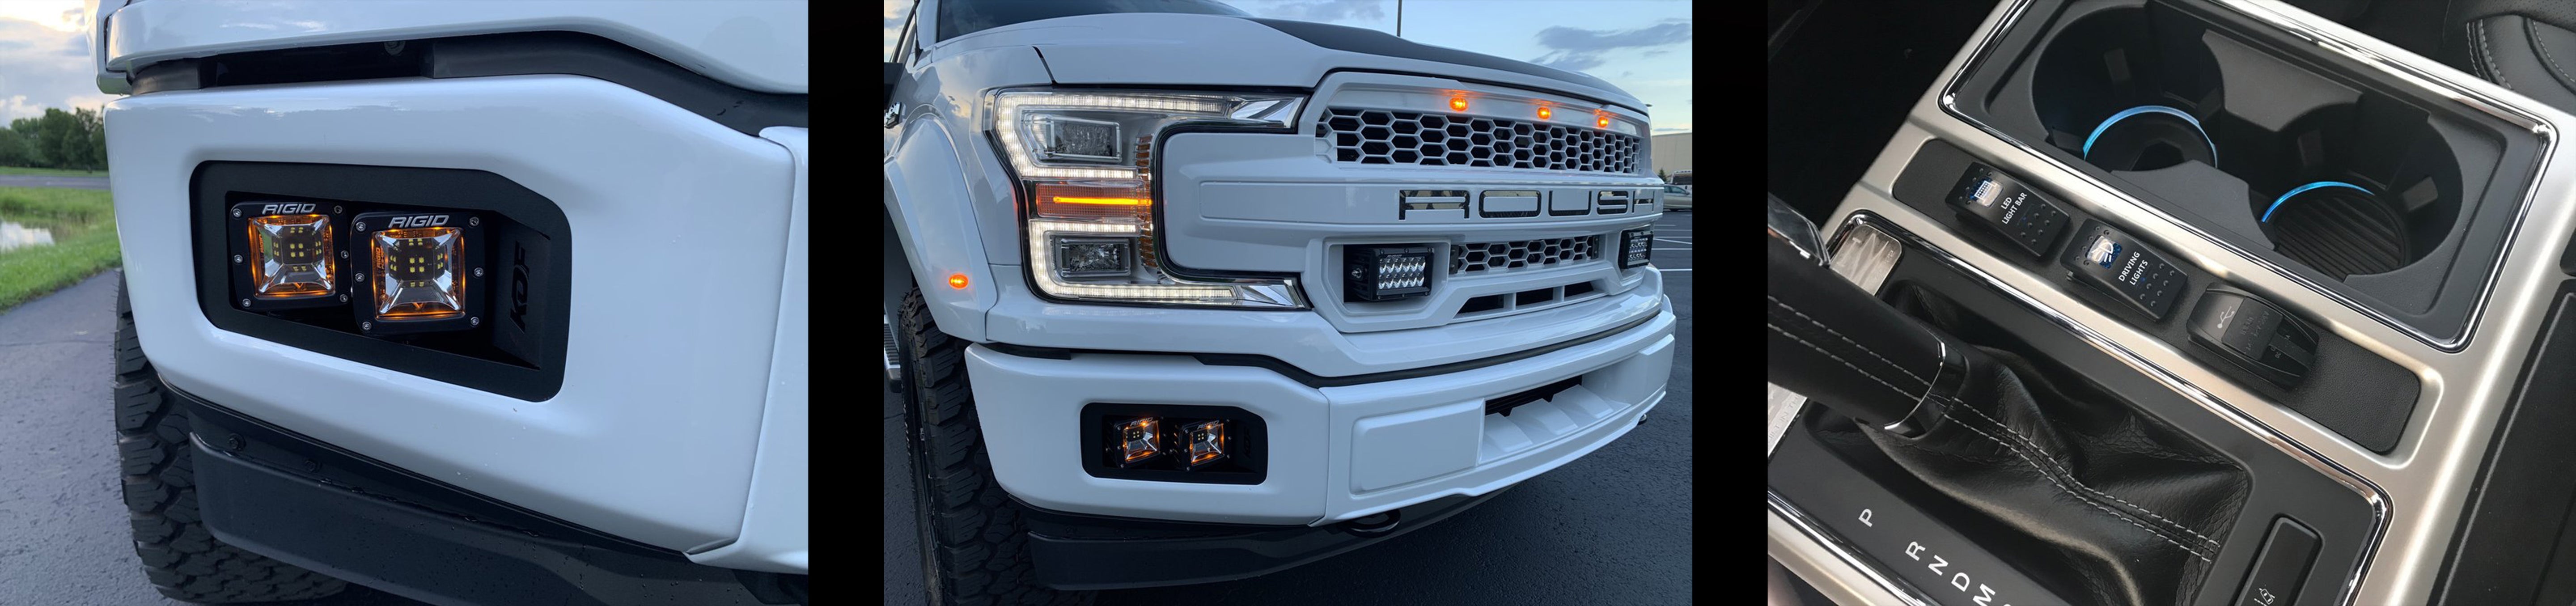 Ford Roush Truck with Truck LED Lights